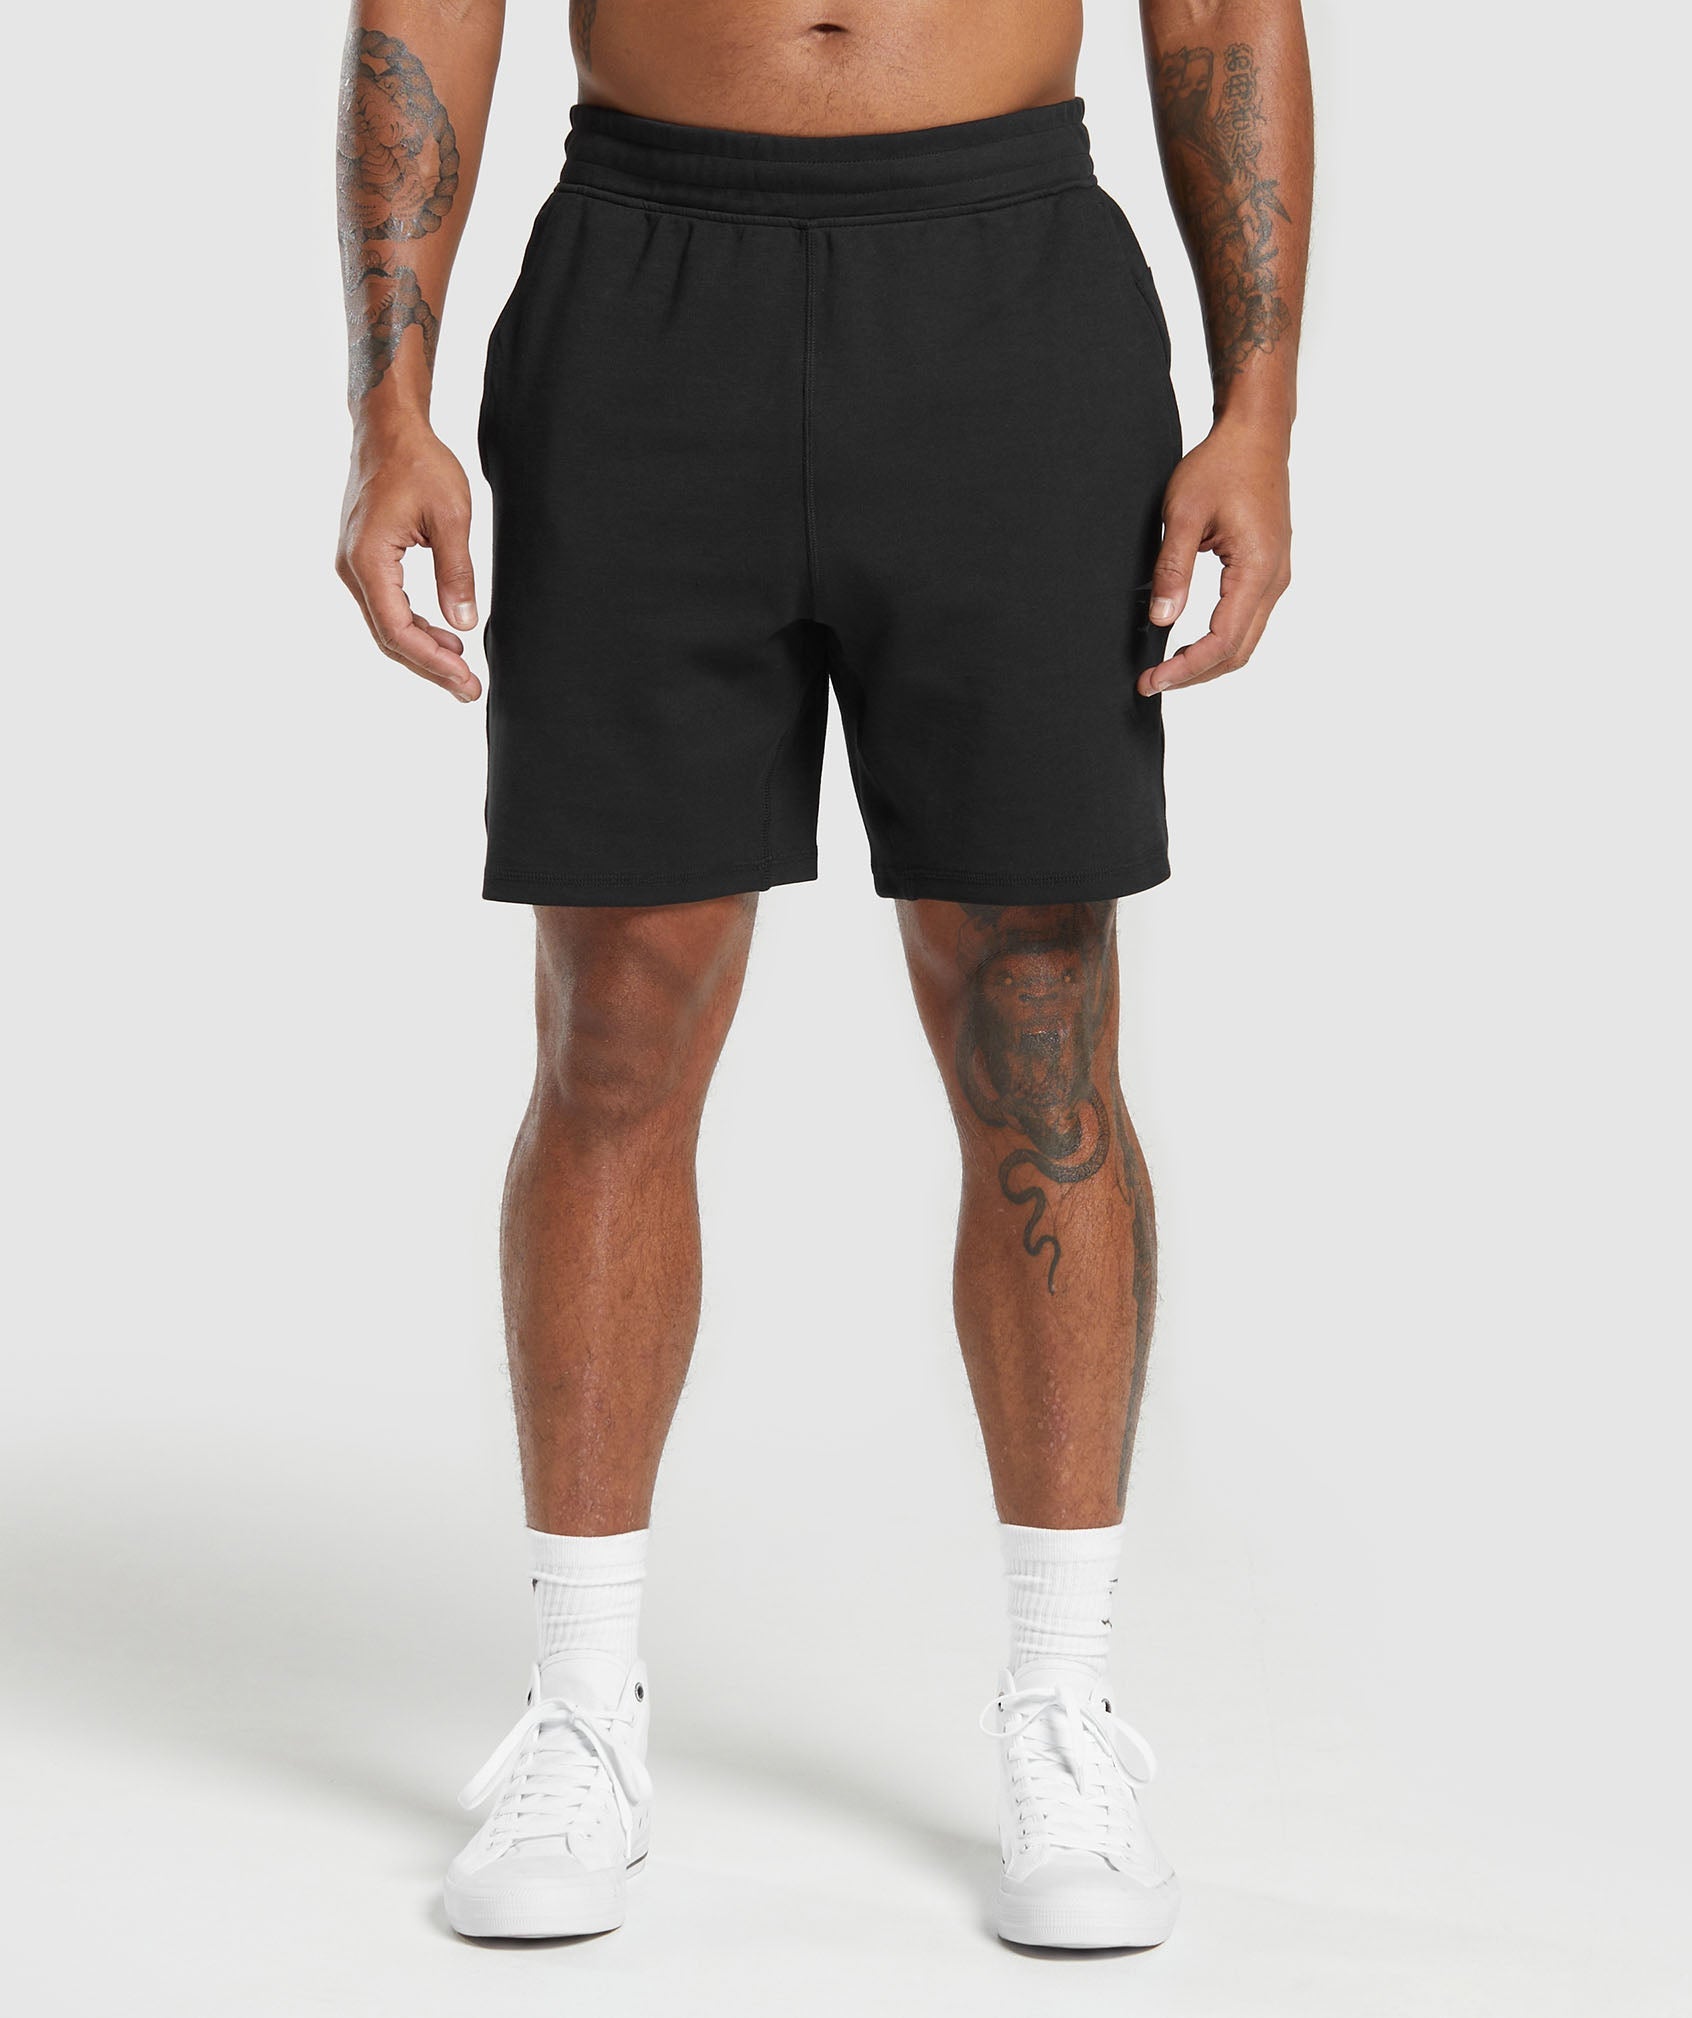 Bold 7" Shorts in Black - view 3